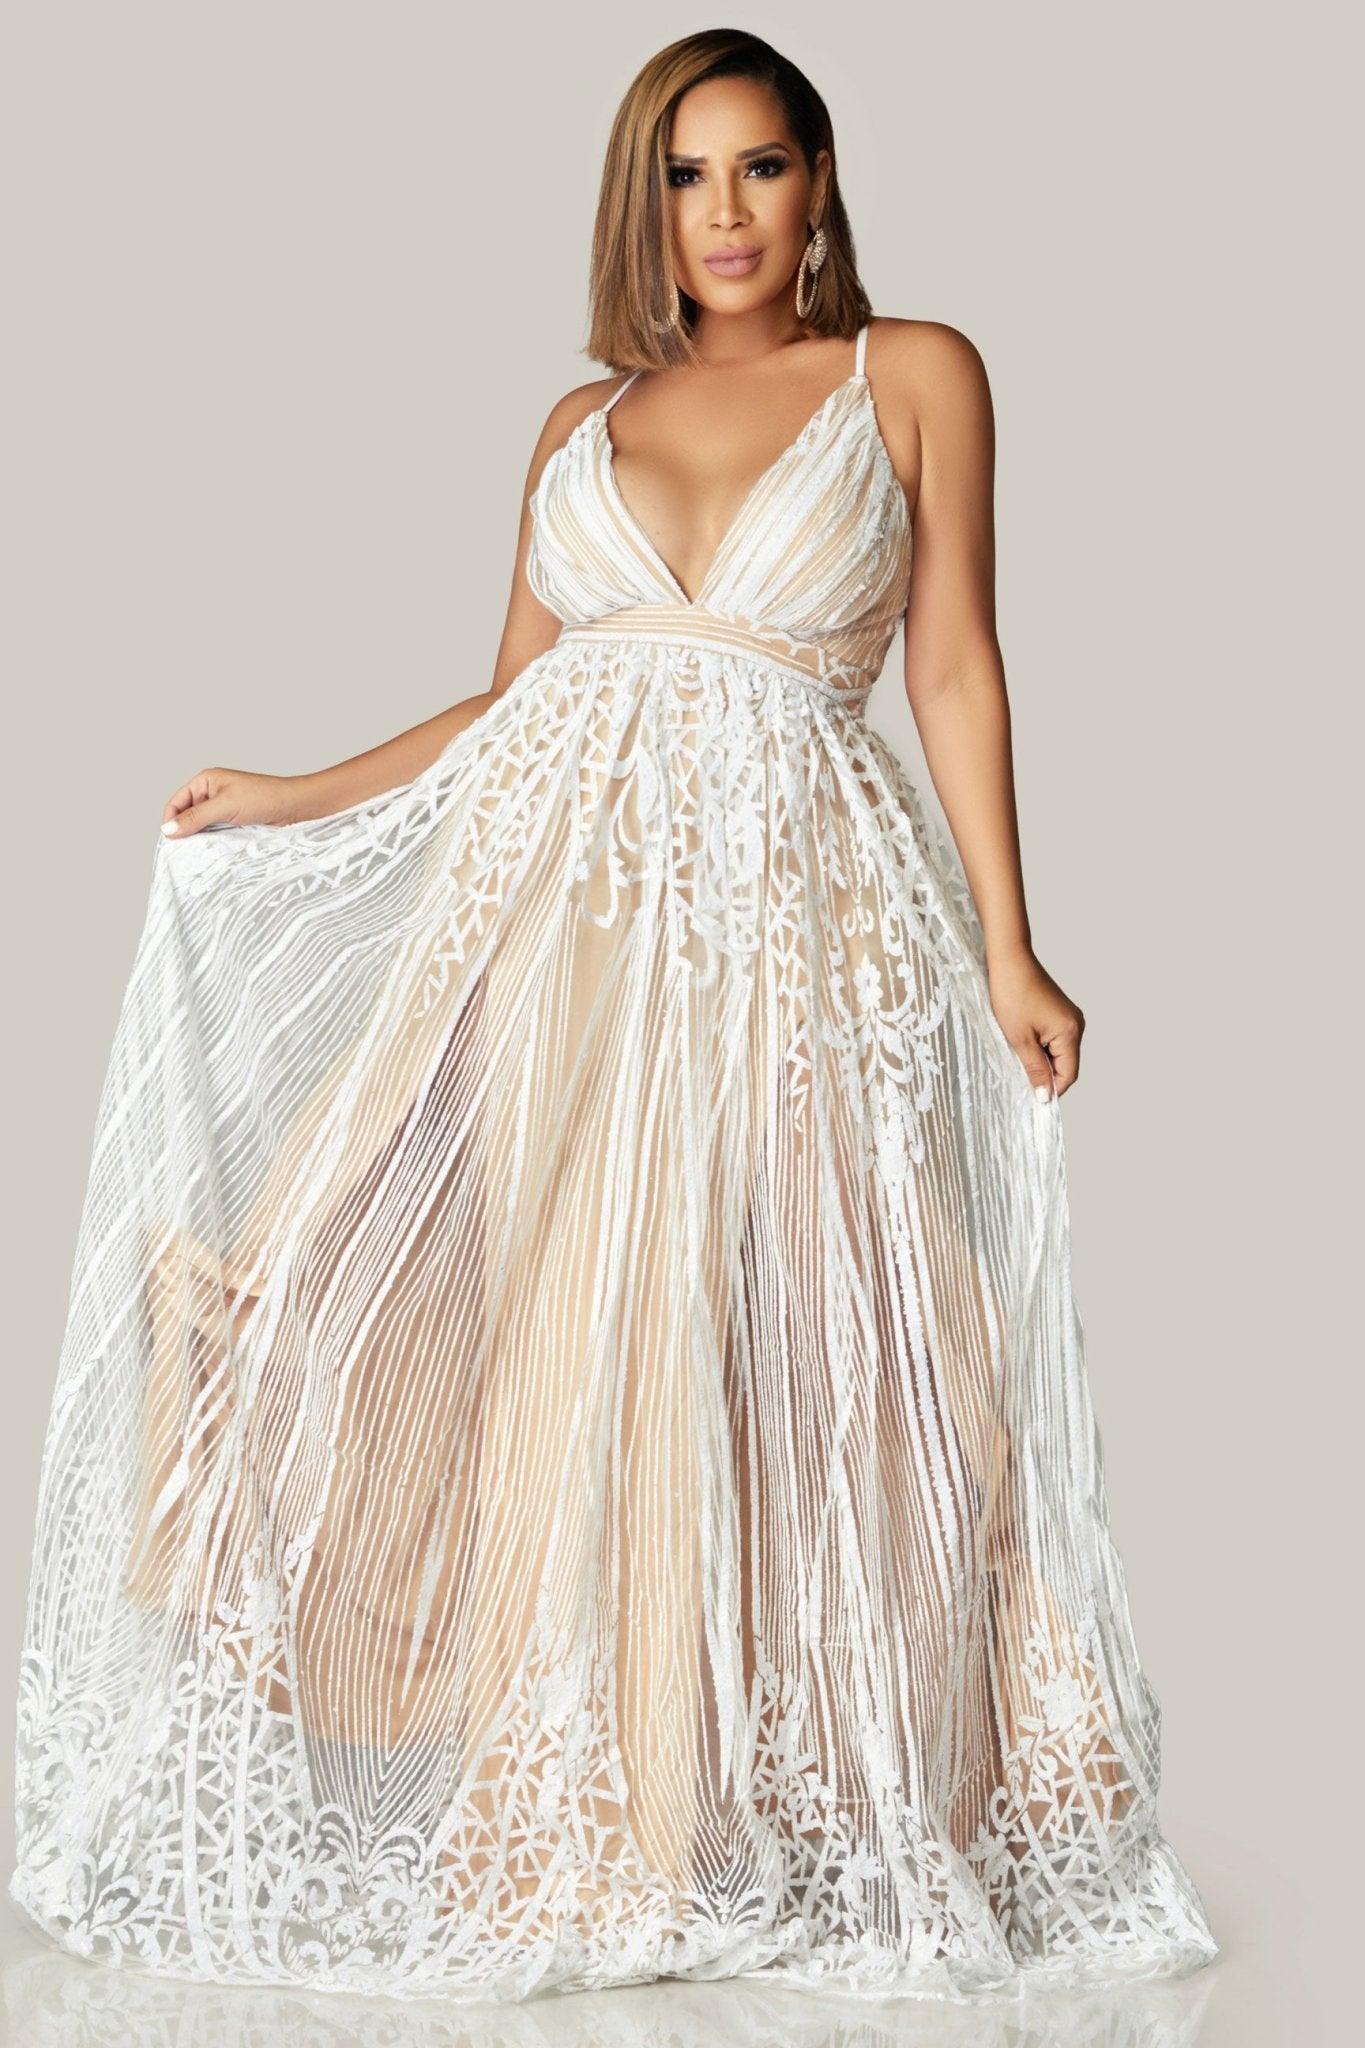 Aphrodite Sequin Border Maxi Gown Dress - MY SEXY STYLES